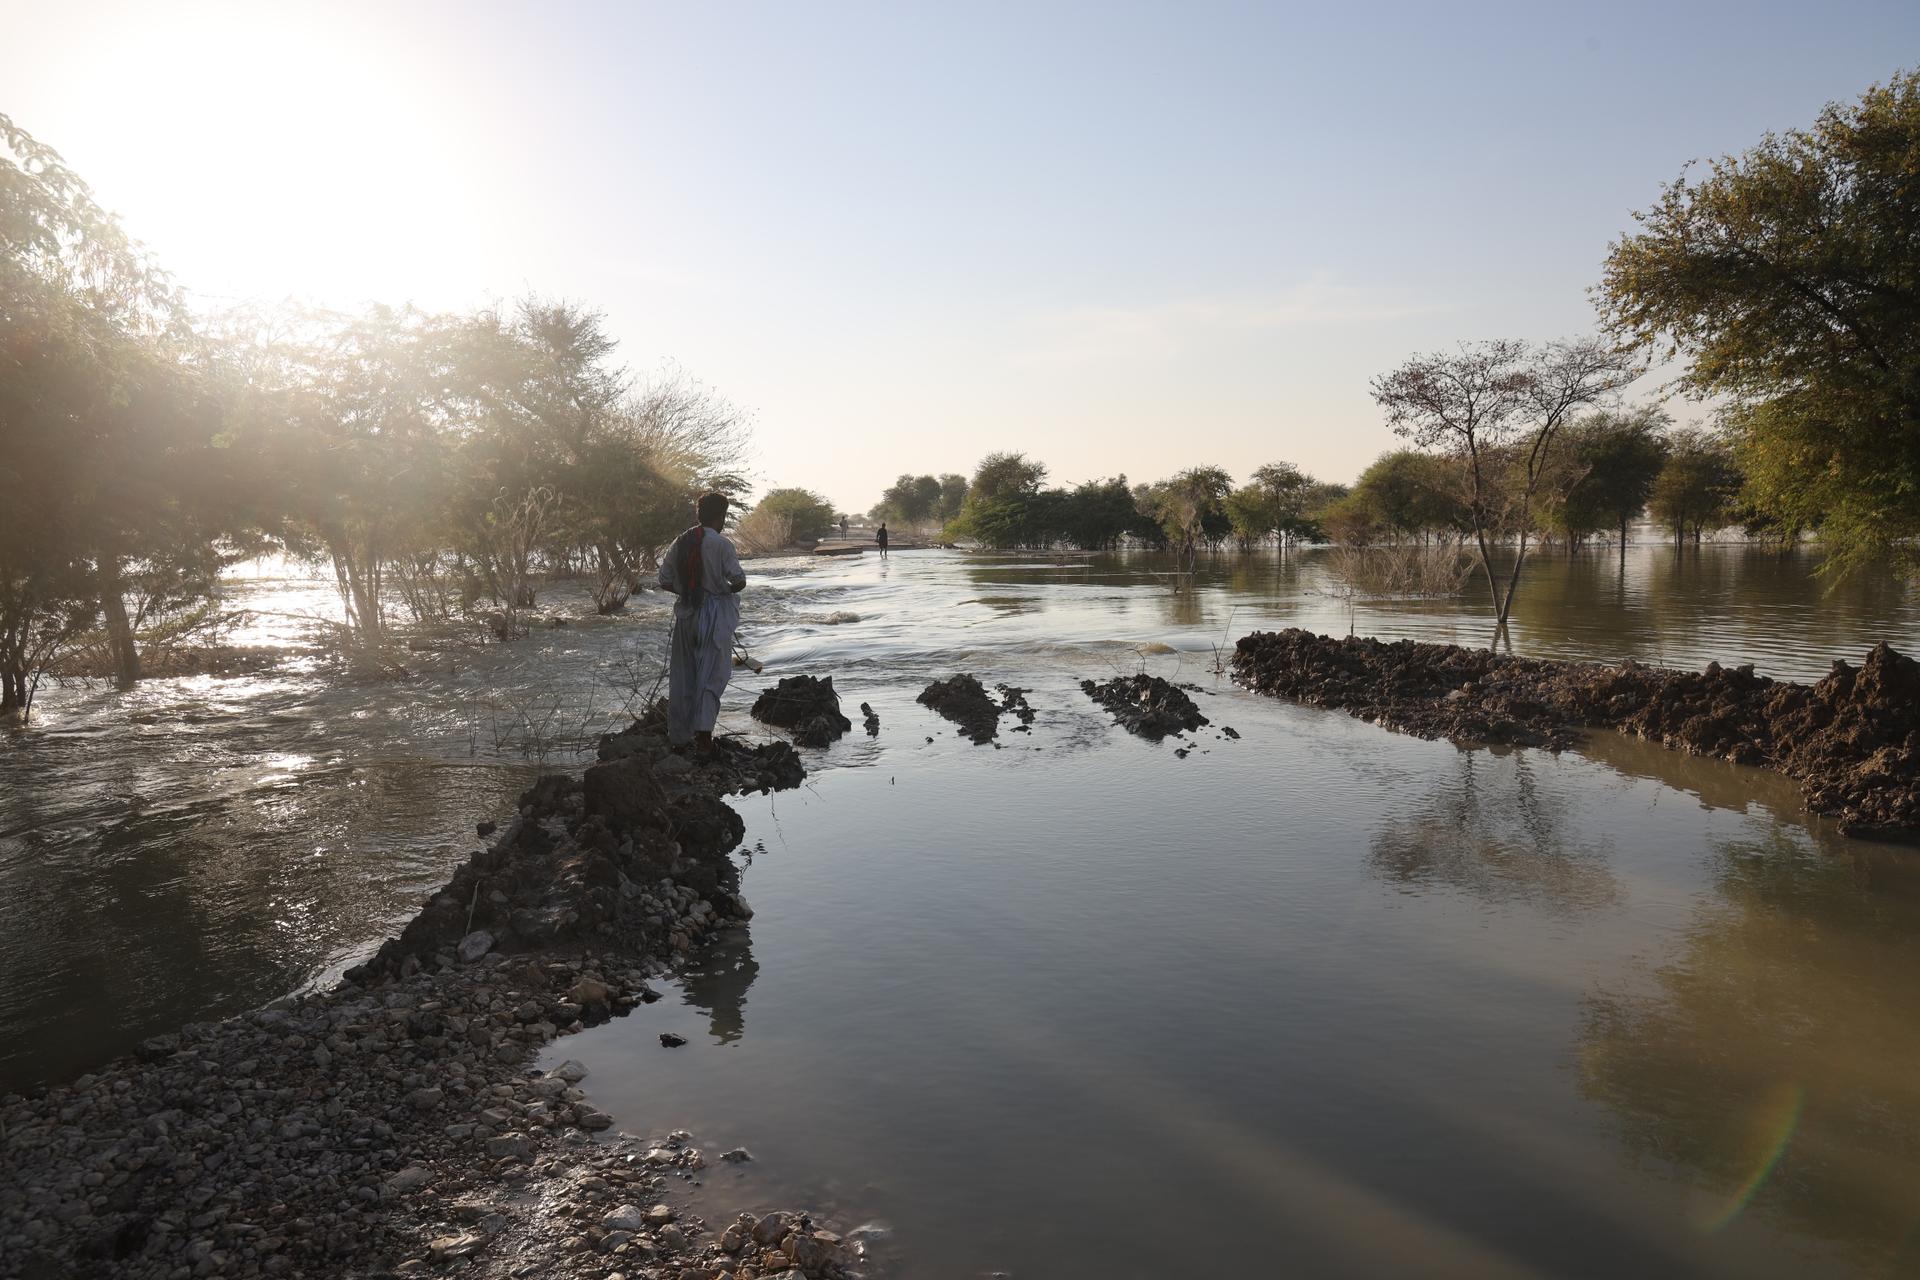 What used to be a road in Pakistan's Sindh province before it was inundated by floodwaters.